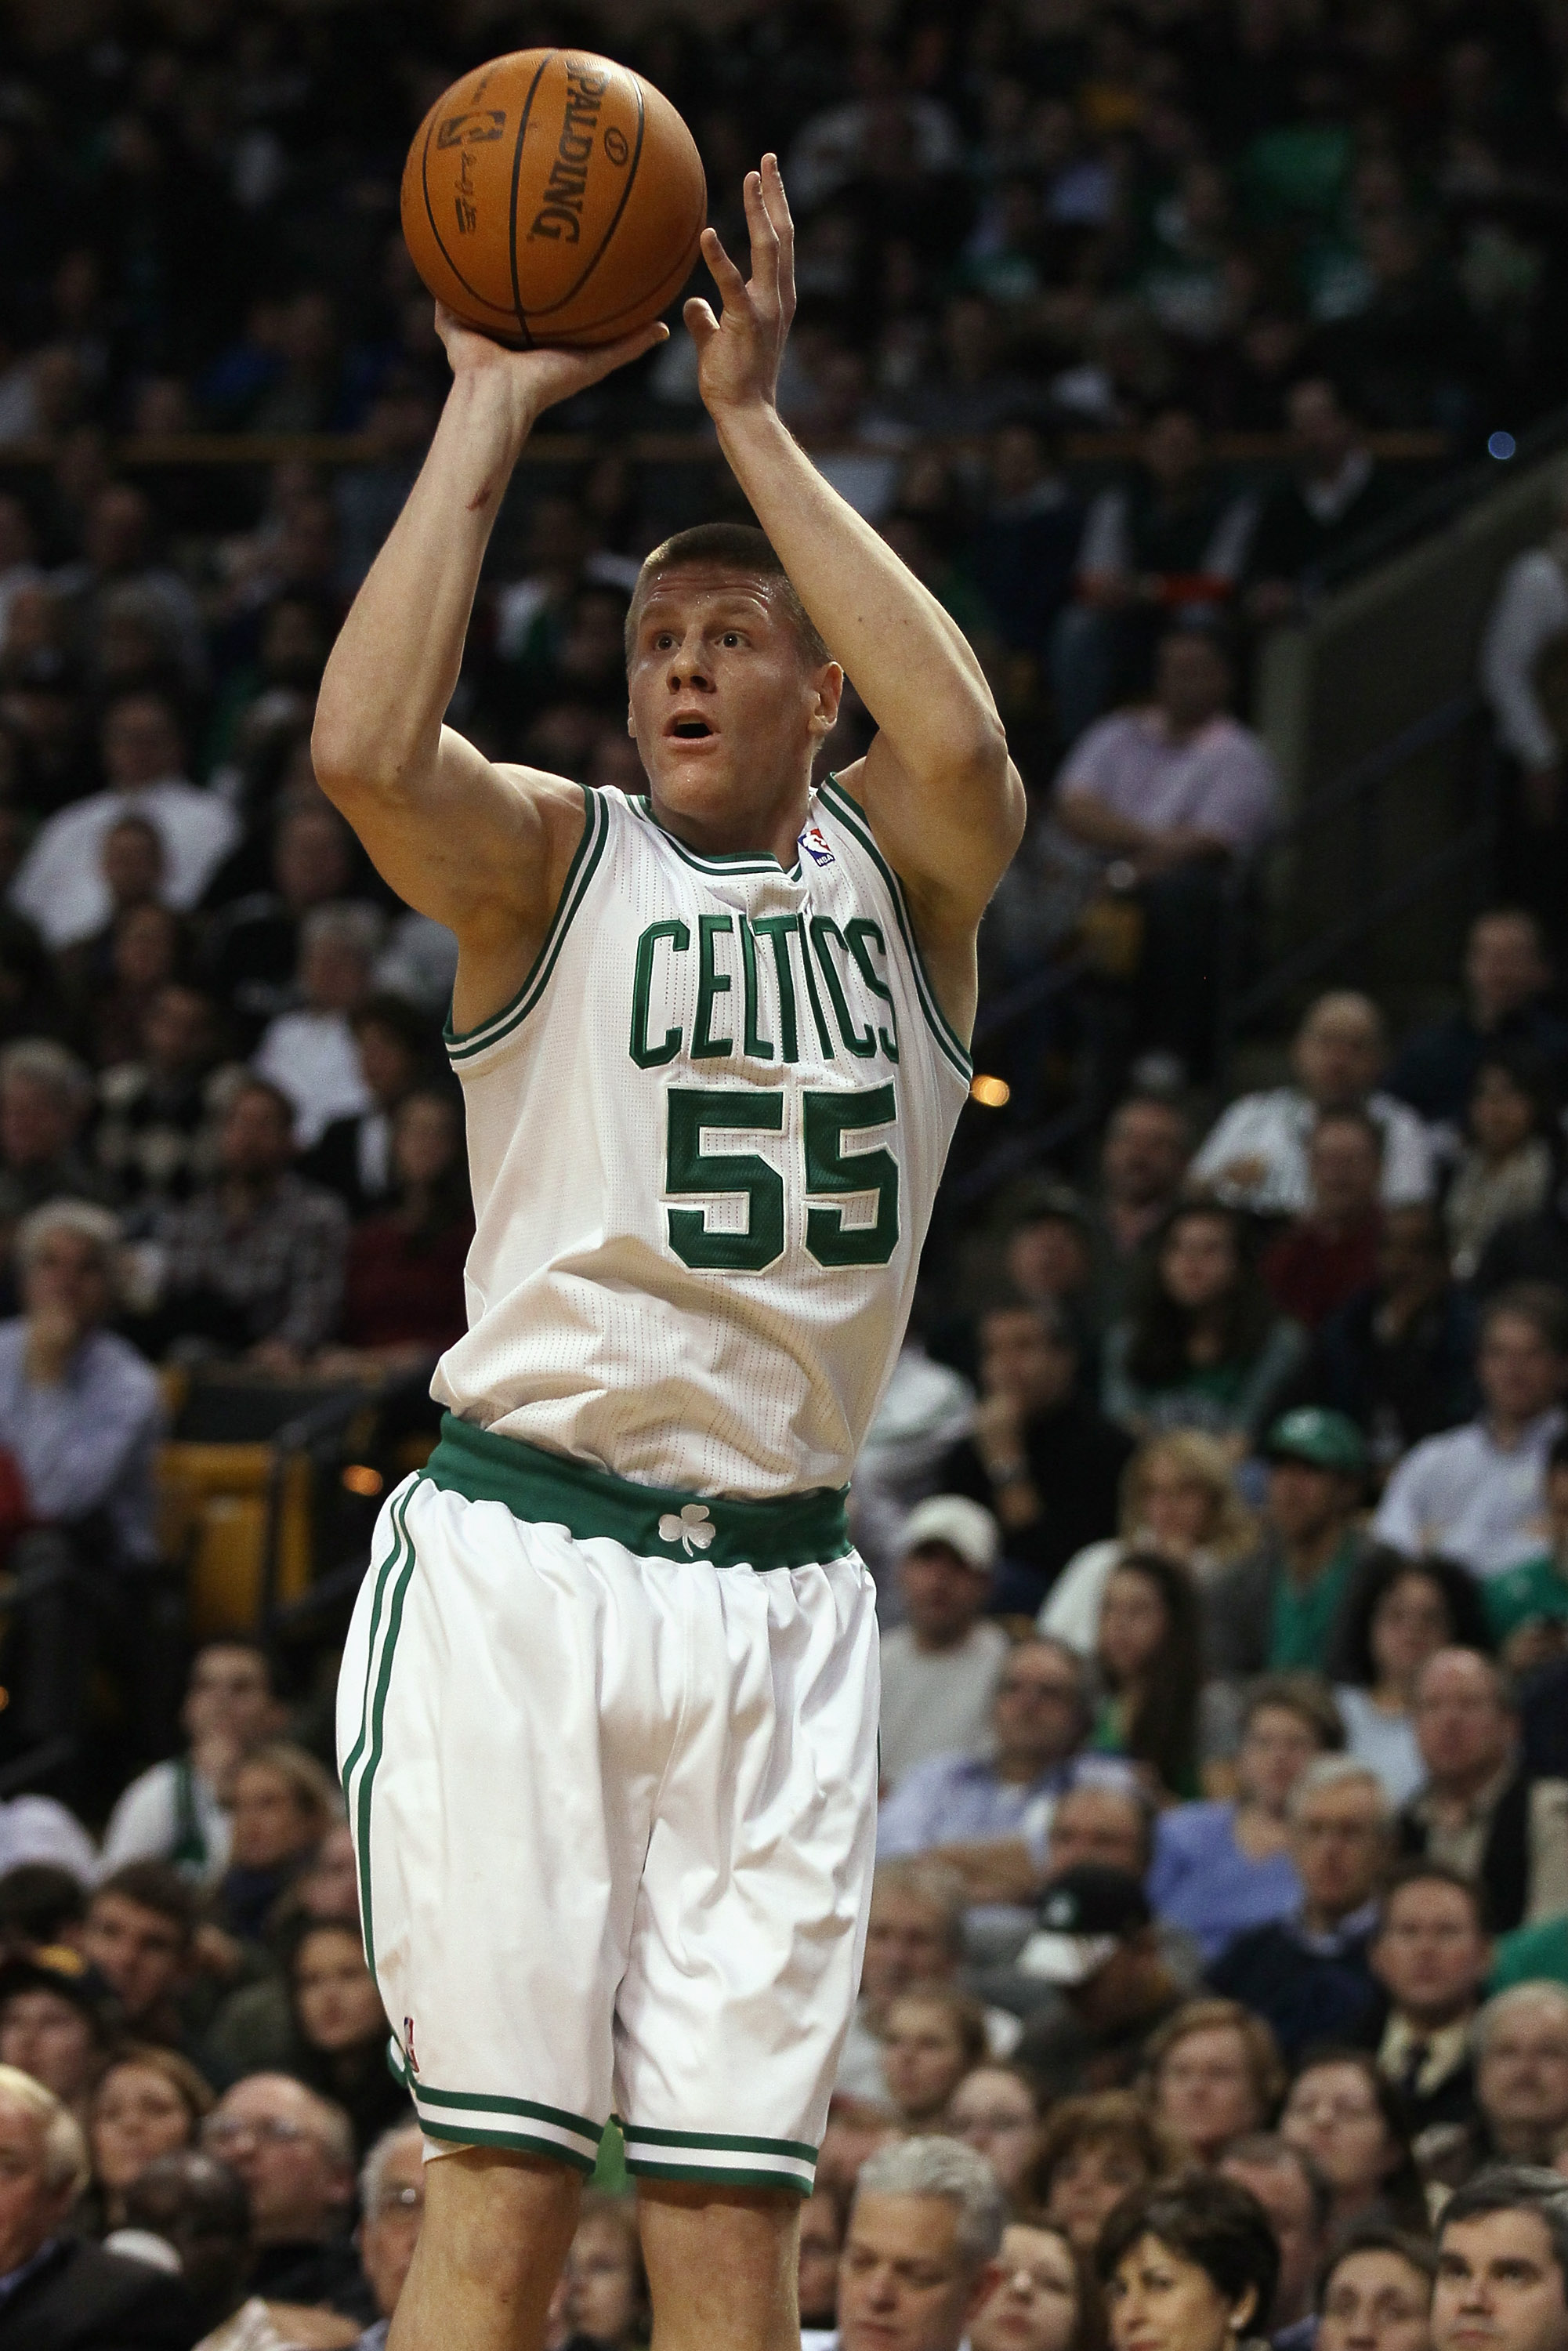 BOSTON, MA - DECEMBER 16:  Luke Harangody #55  of the Boston Celtics takes a shot in the first half against the Atlanta Hawks on December 16, 2010 at the TD Garden in Boston, Massachusetts. NOTE TO USER: User expressly acknowledges and agrees that, by dow